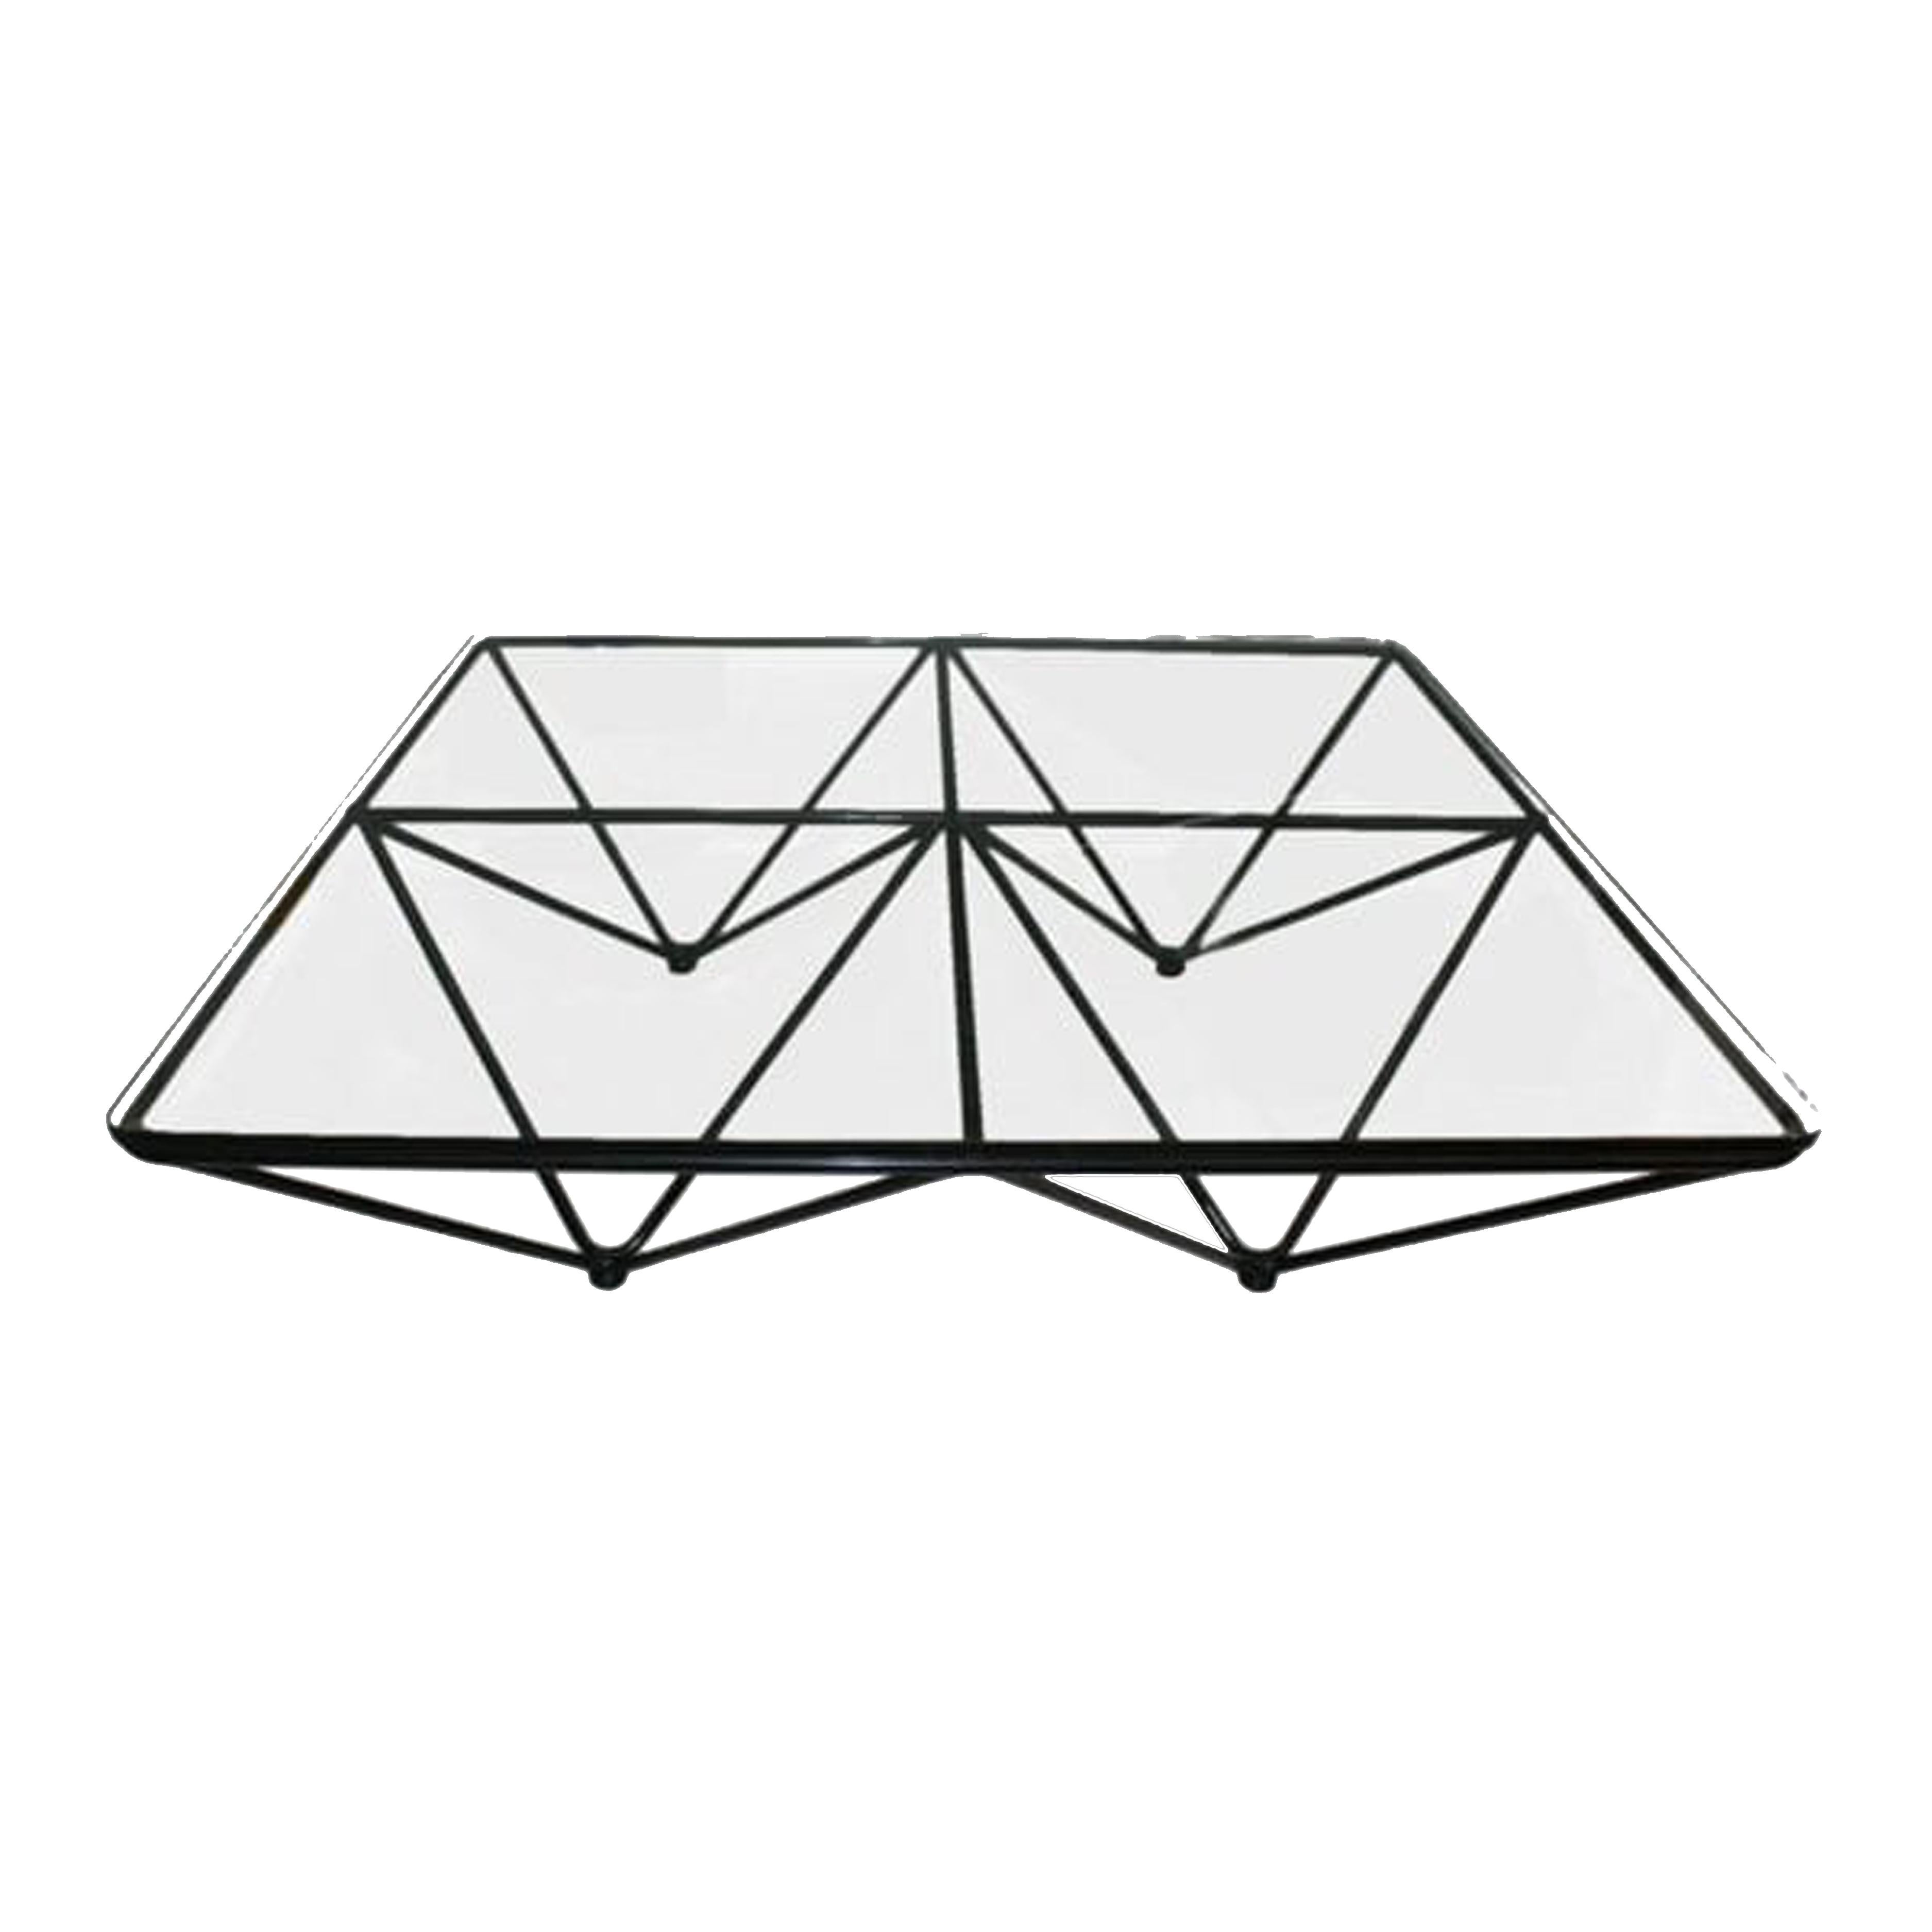 In the Style of Paolo Piva Geometric Metal Base and Glass Top Coffee Table